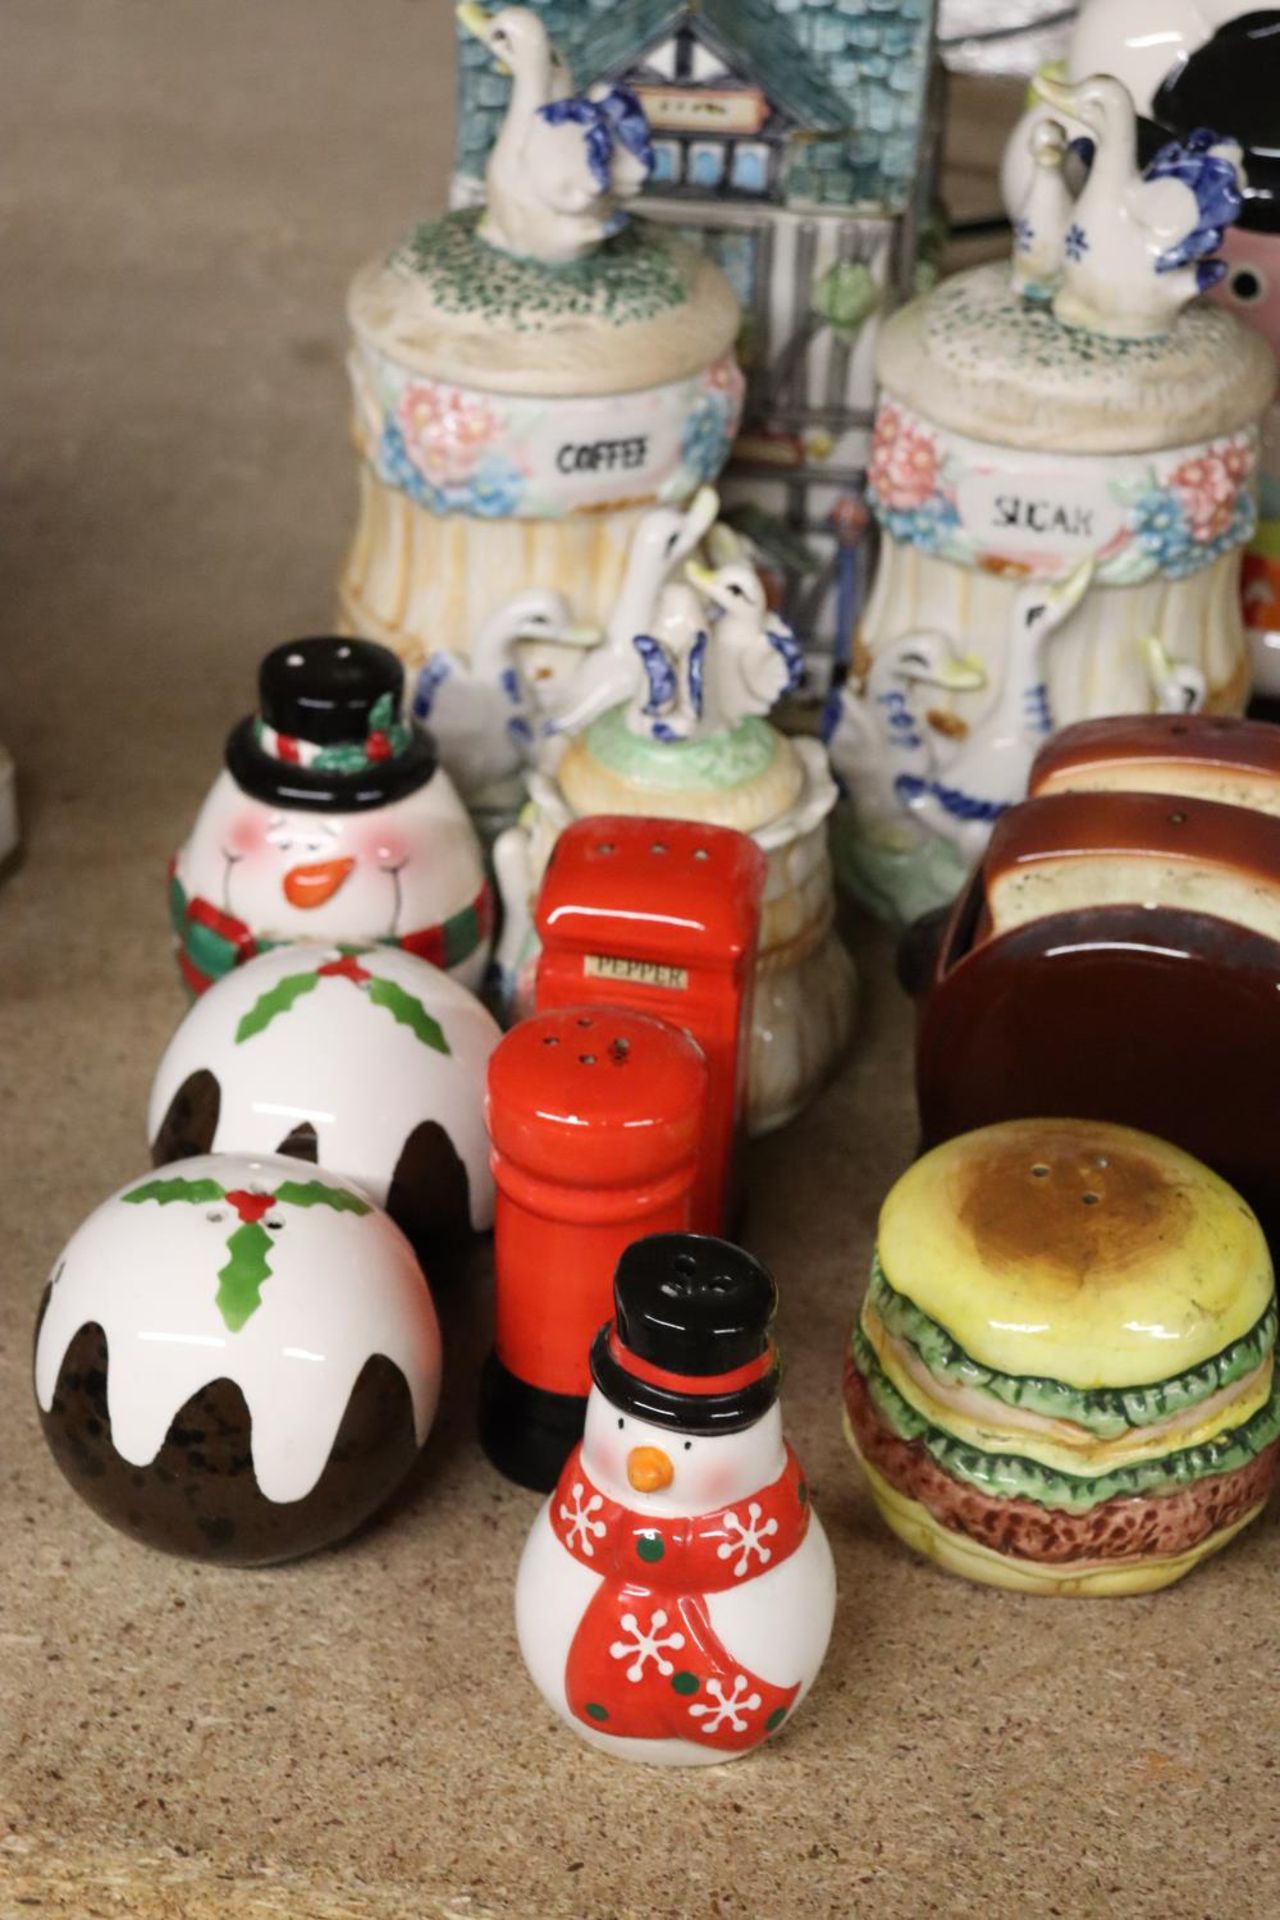 A COLLECTION OF NOVELTY CRUET SETS AND STORAGE JARS - Image 4 of 5